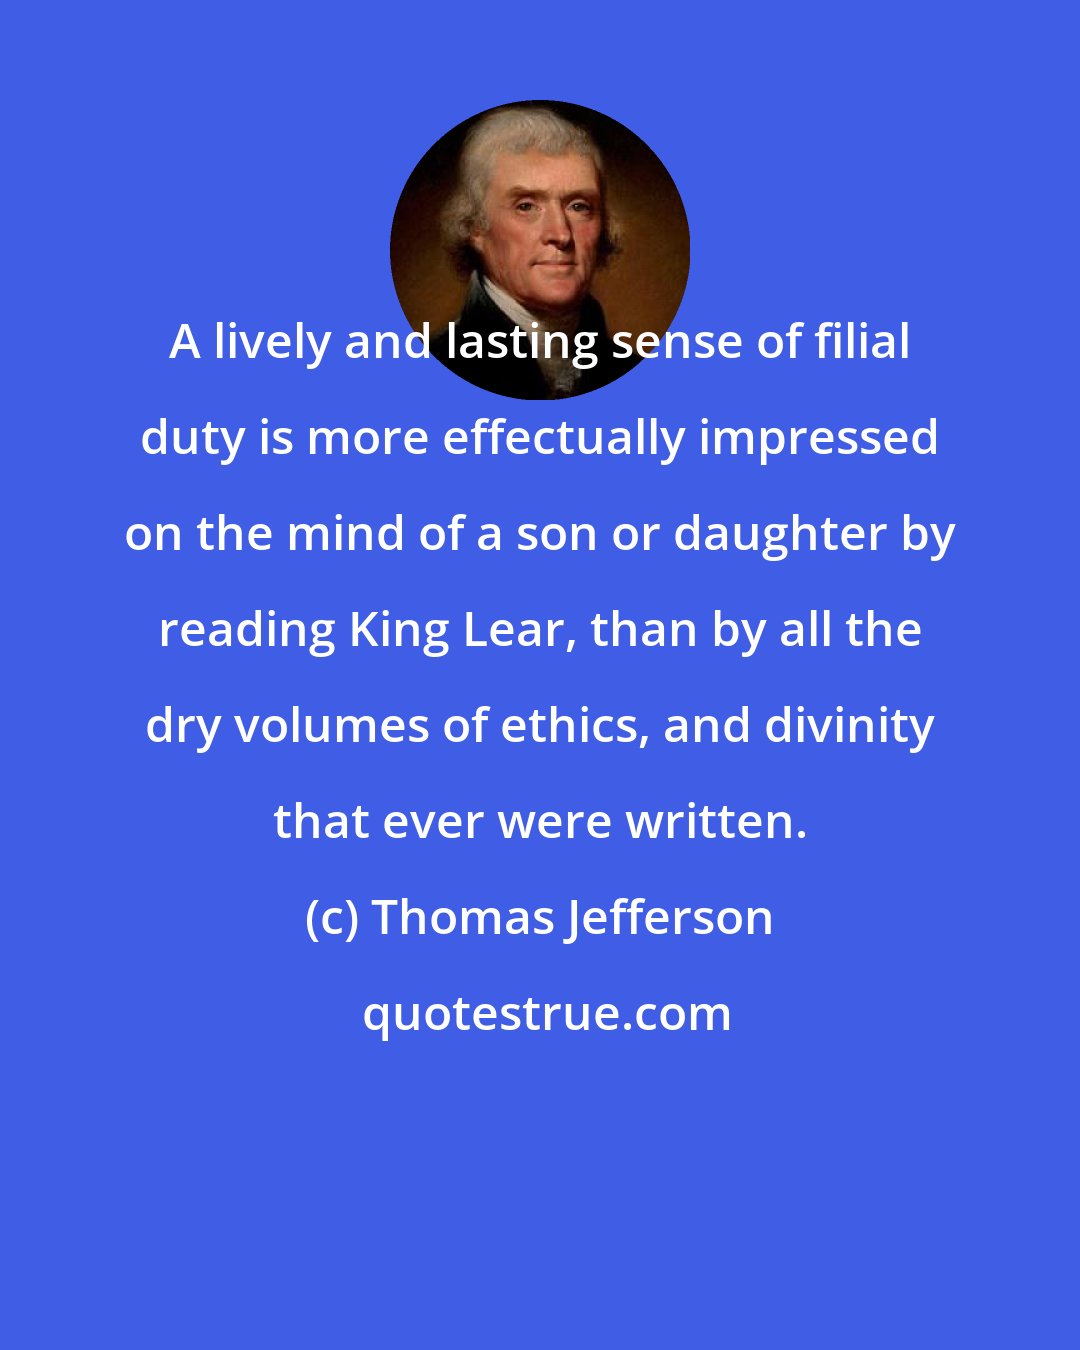 Thomas Jefferson: A lively and lasting sense of filial duty is more effectually impressed on the mind of a son or daughter by reading King Lear, than by all the dry volumes of ethics, and divinity that ever were written.